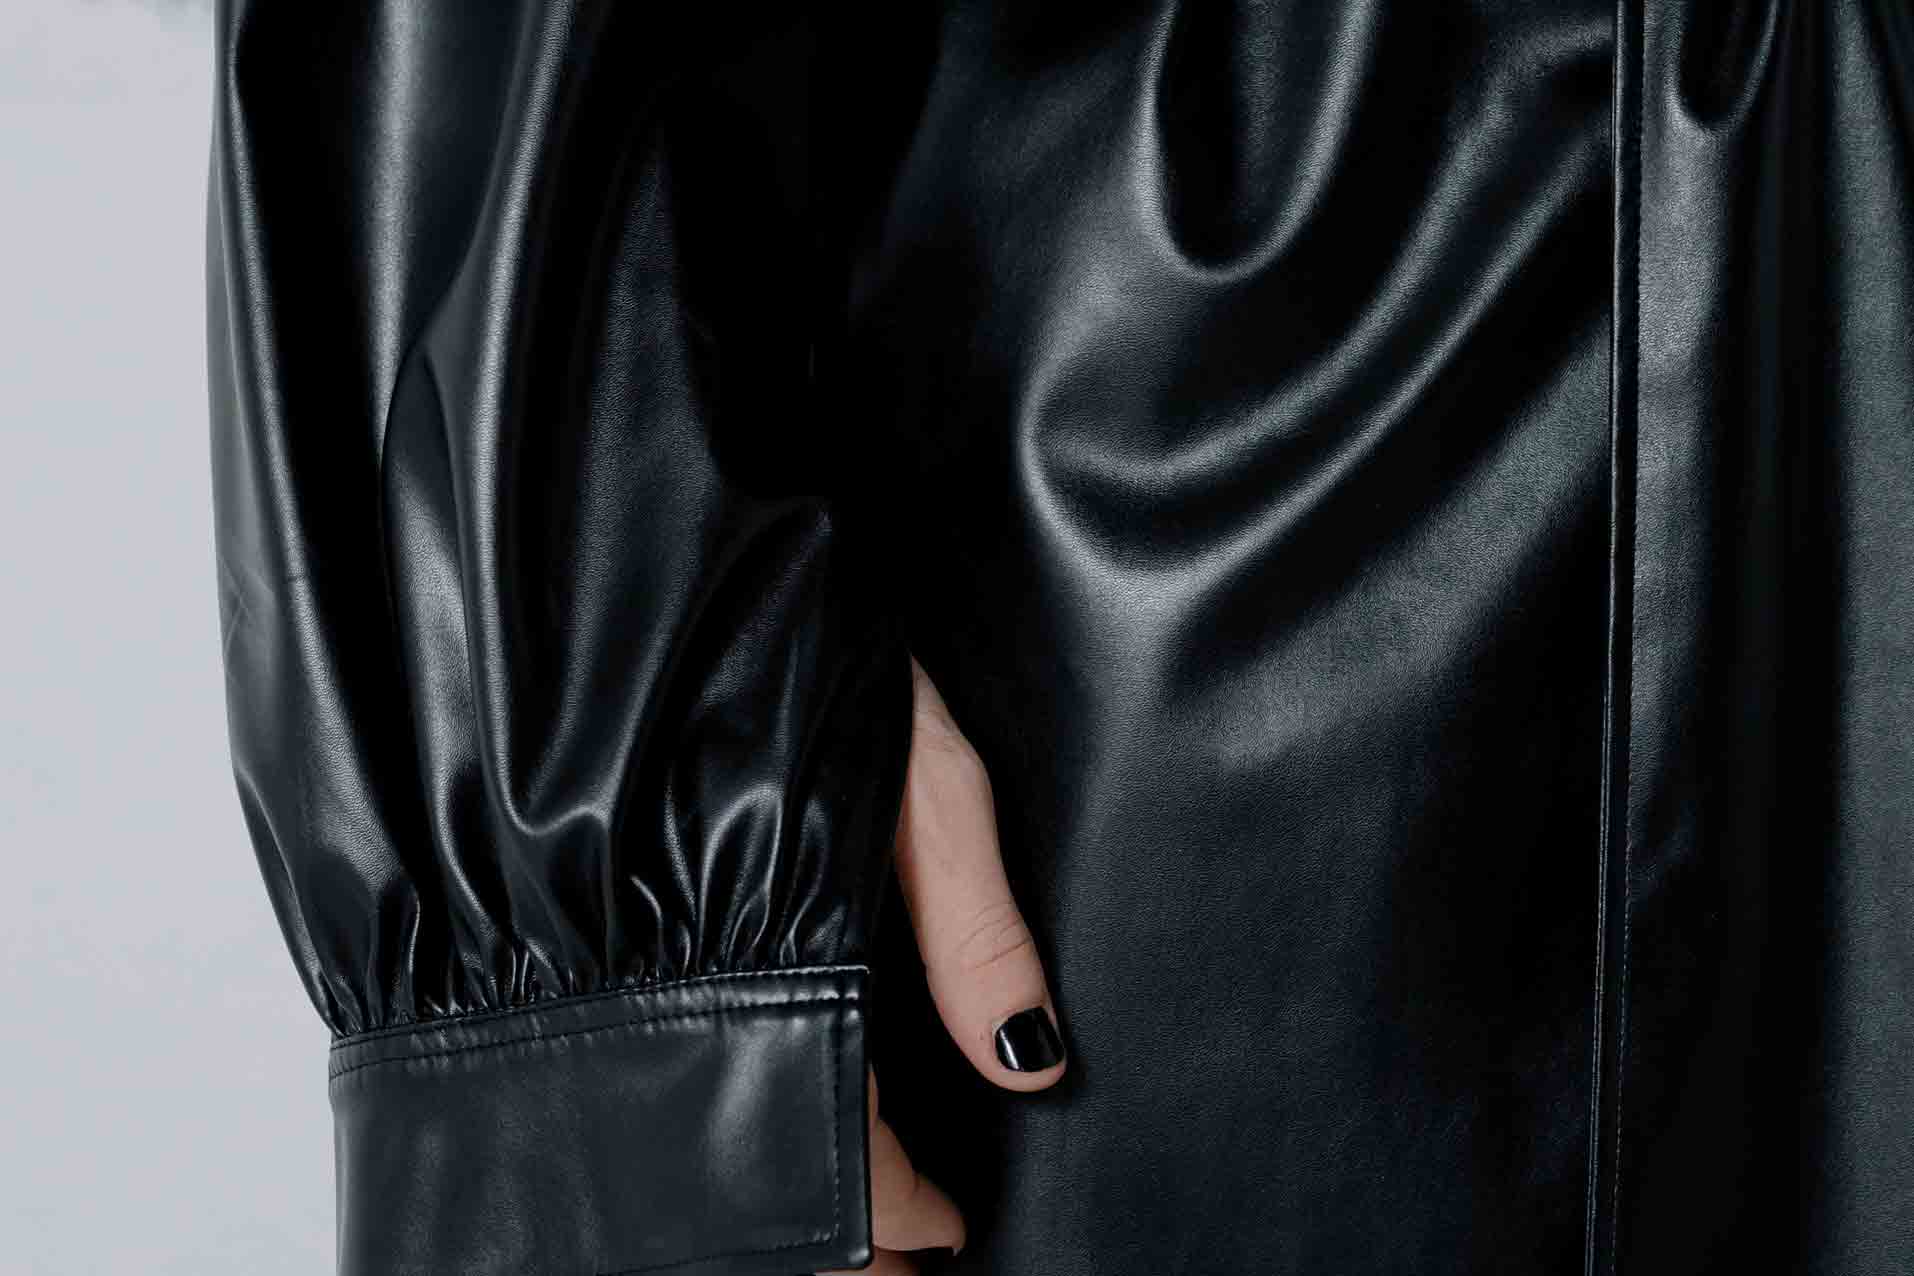 A close up of a woman's arm wearing a black baggy vegan leather jacket.